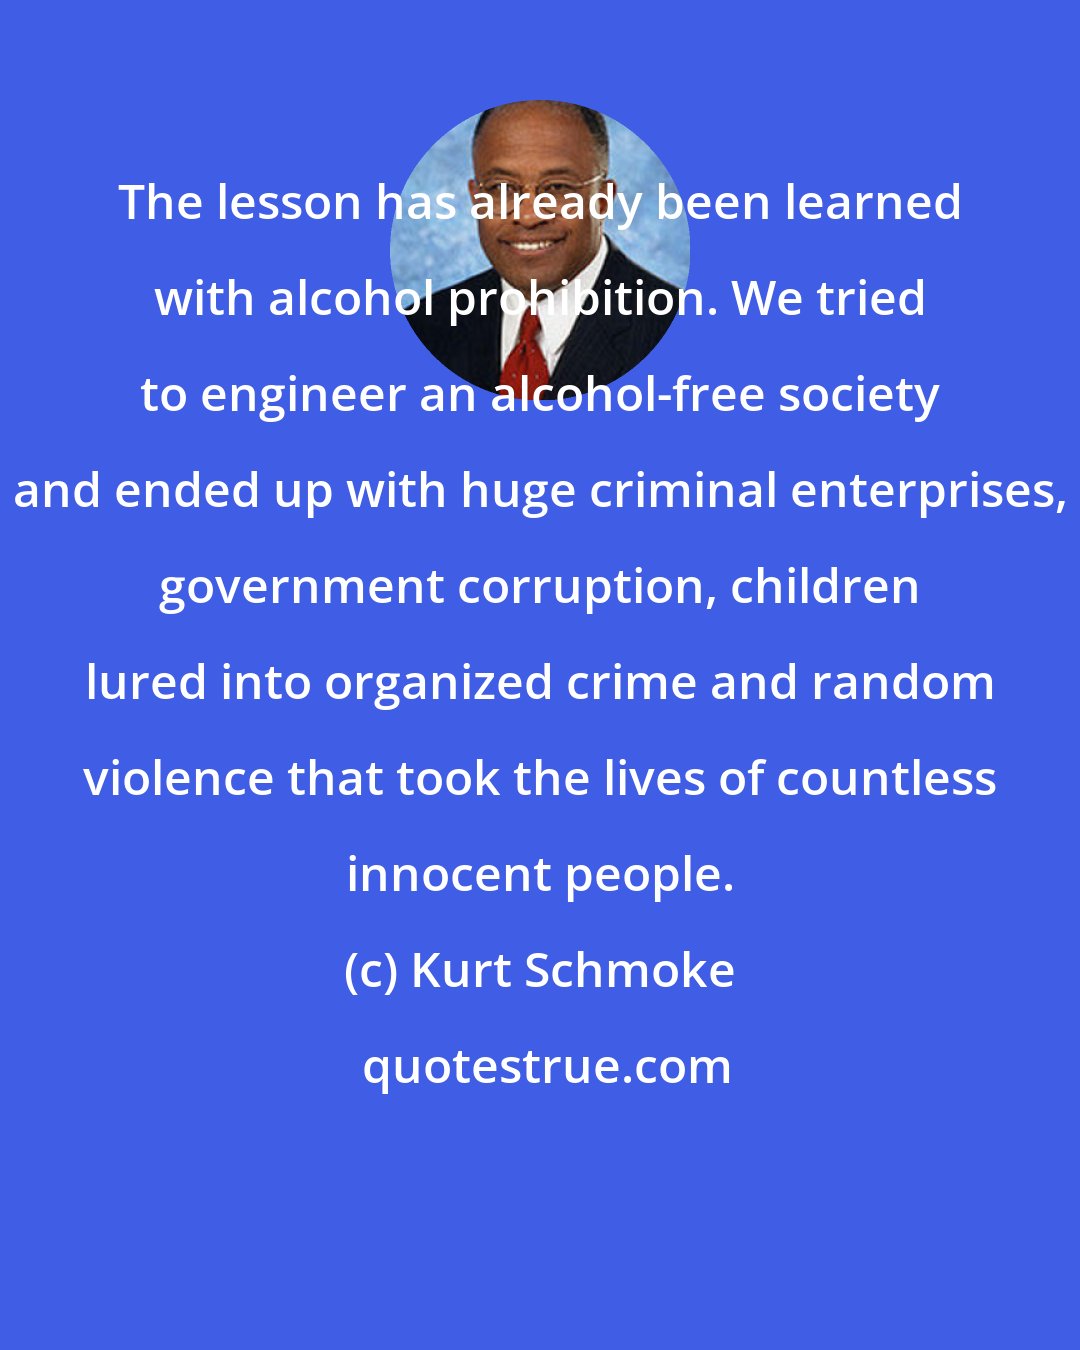 Kurt Schmoke: The lesson has already been learned with alcohol prohibition. We tried to engineer an alcohol-free society and ended up with huge criminal enterprises, government corruption, children lured into organized crime and random violence that took the lives of countless innocent people.